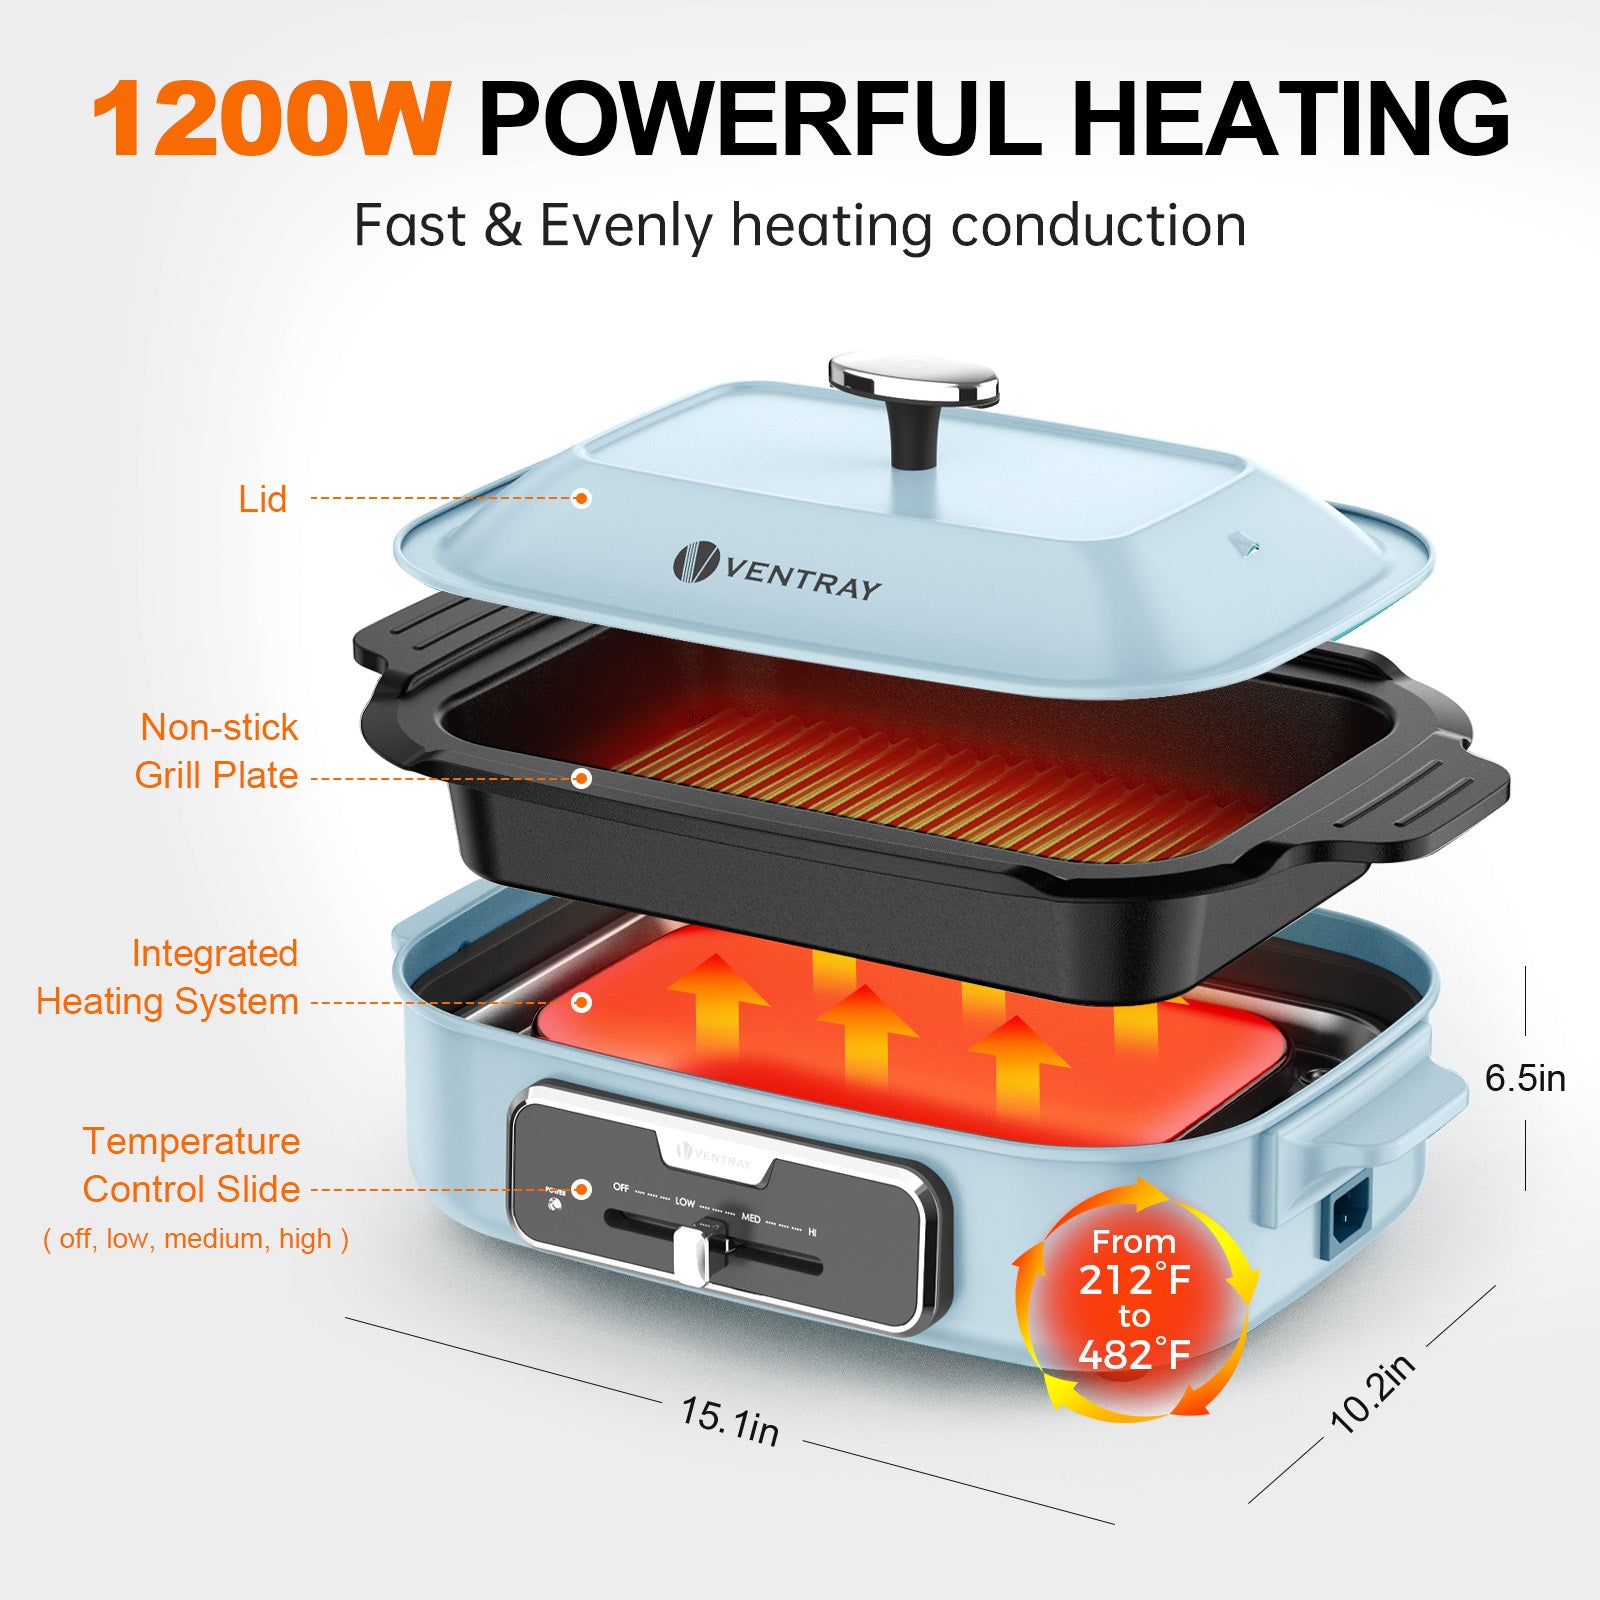 High-Quality Electric Grill with Smokeless Technology Perfect for